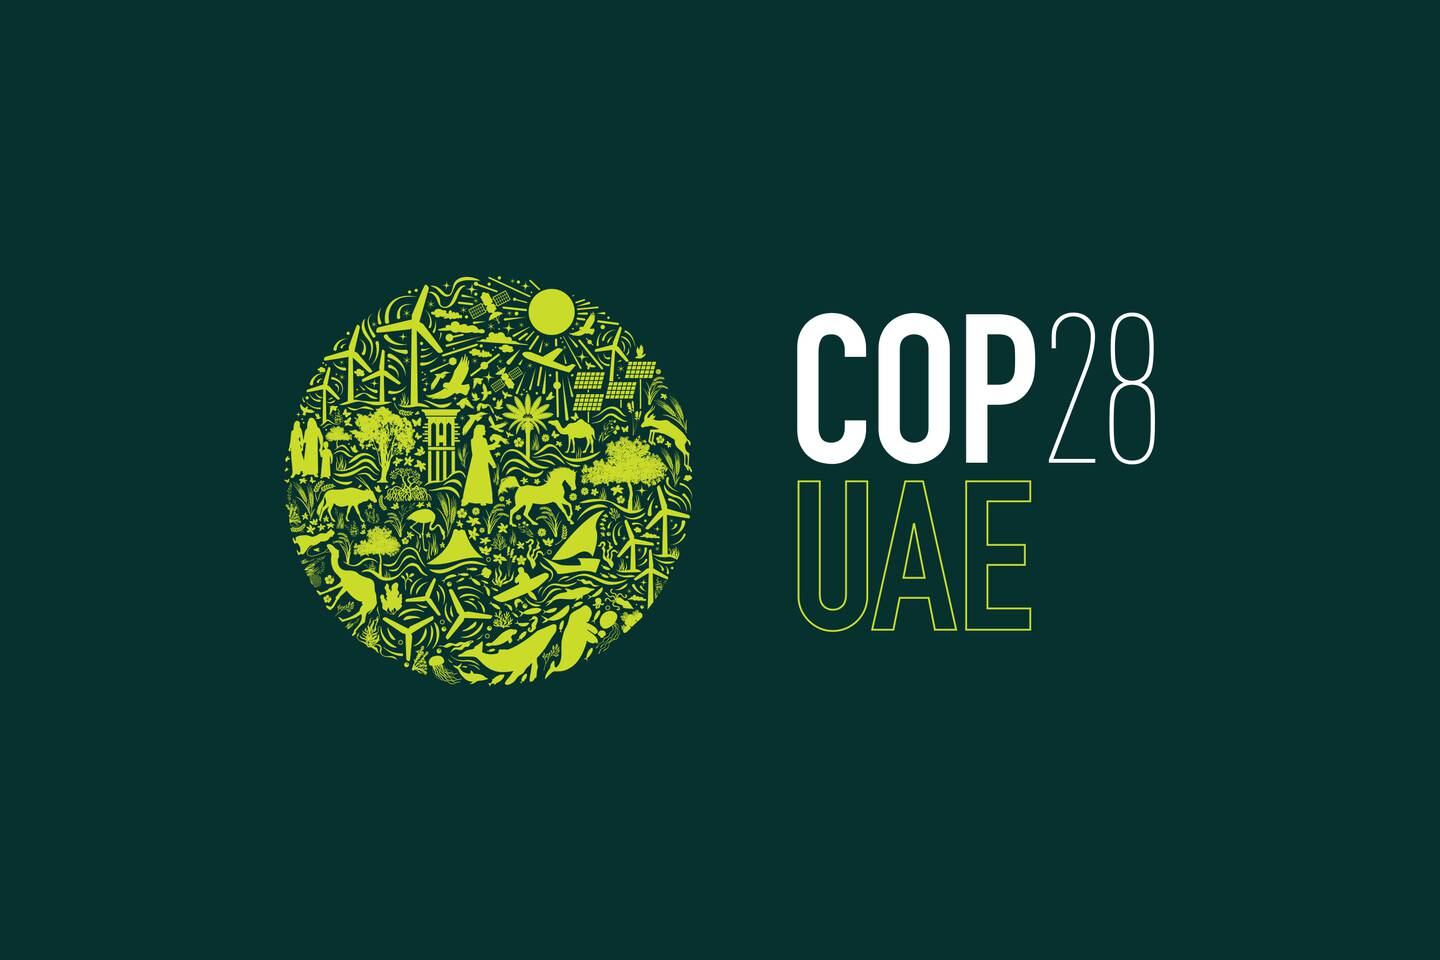 The Cop28 logo was unveiled at the Abu Dhabi National Exhibitions Company on Monday. Photo: Wam